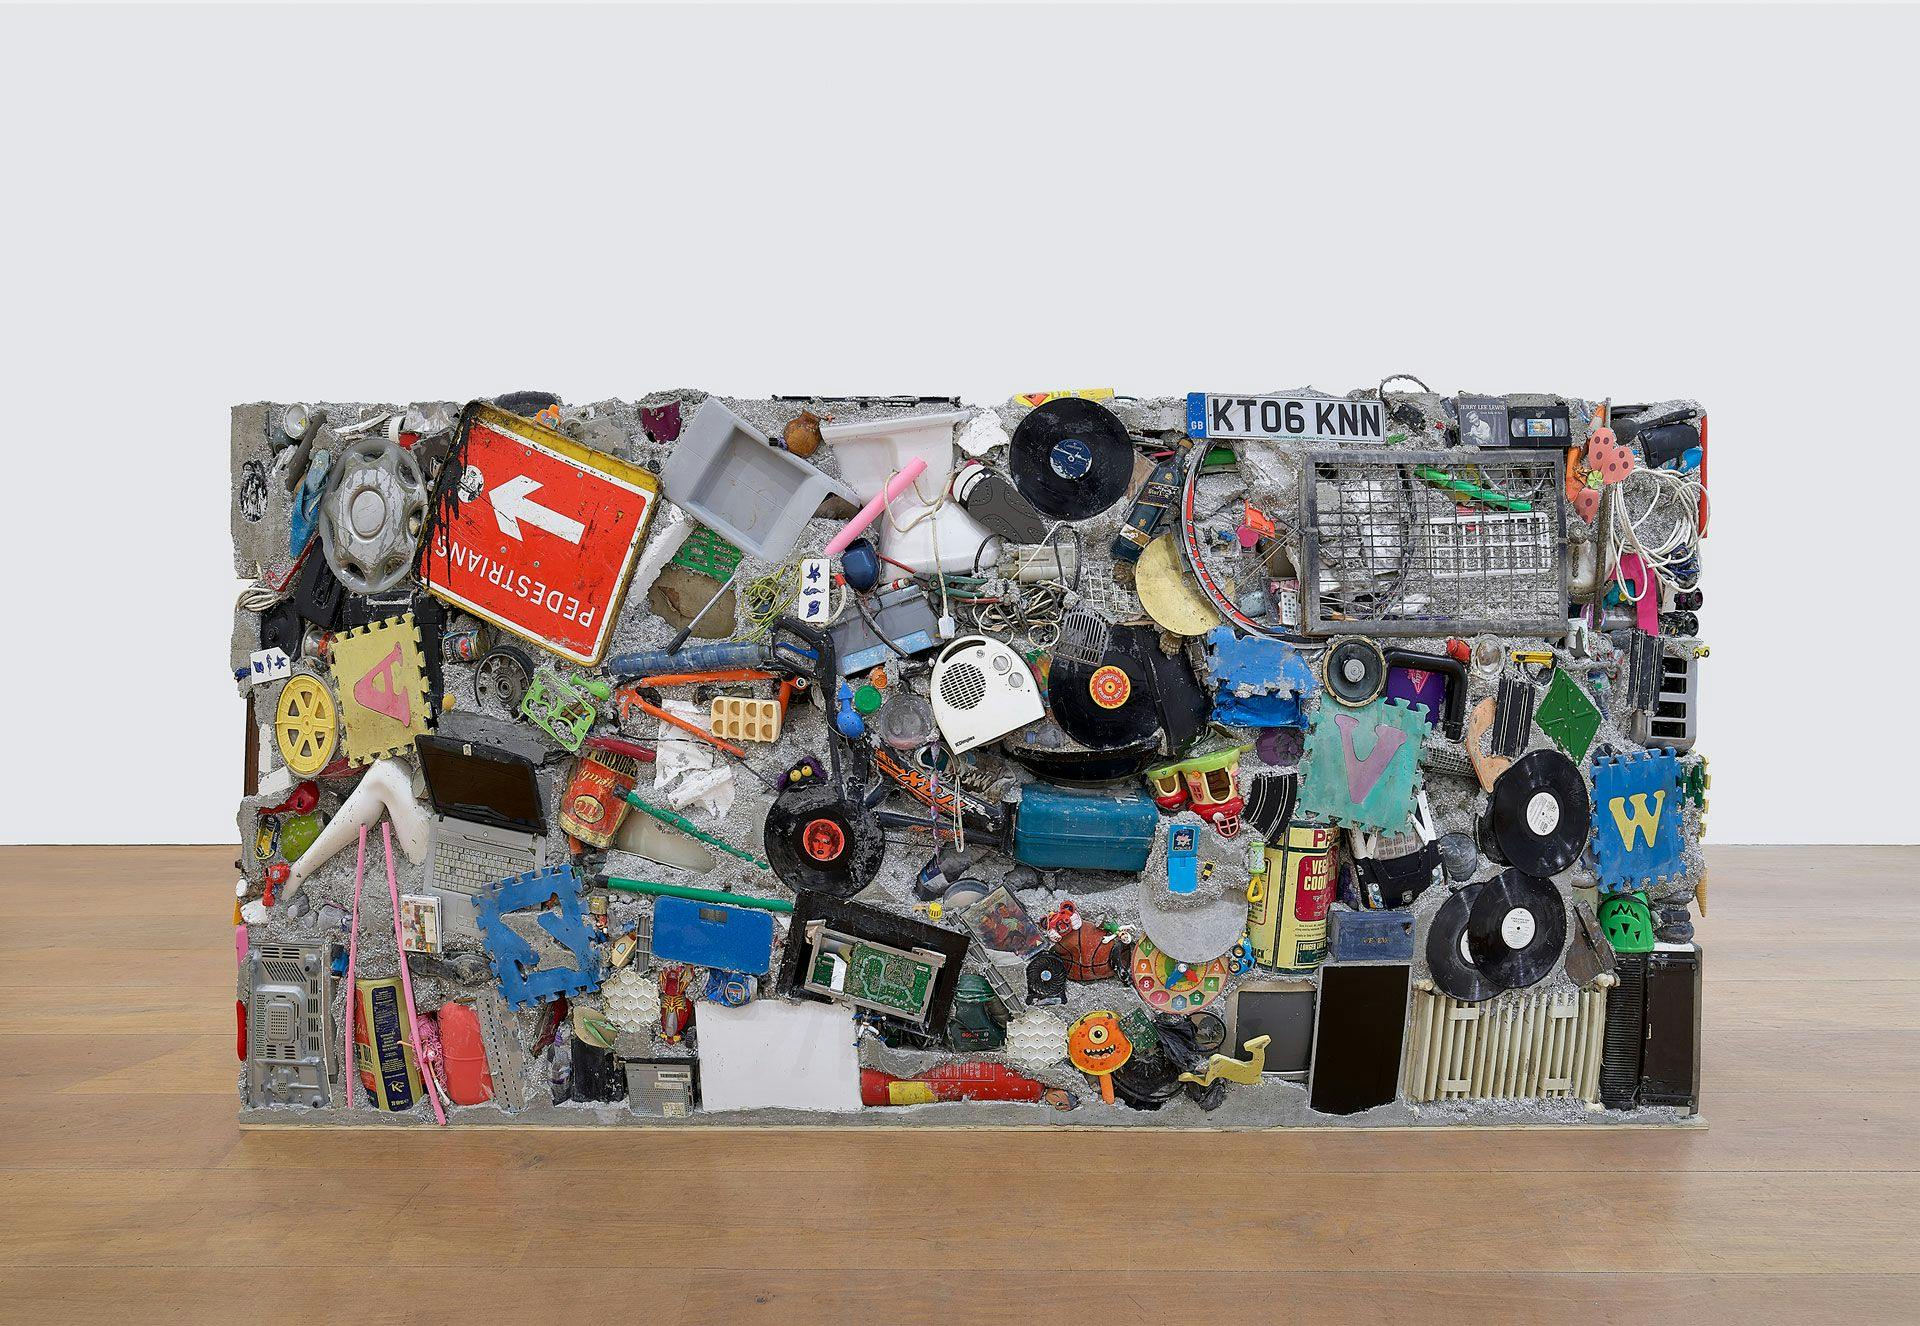 A mixed media work by Gordon Matta-Clark, titled Garbage Wall, dated 1970.